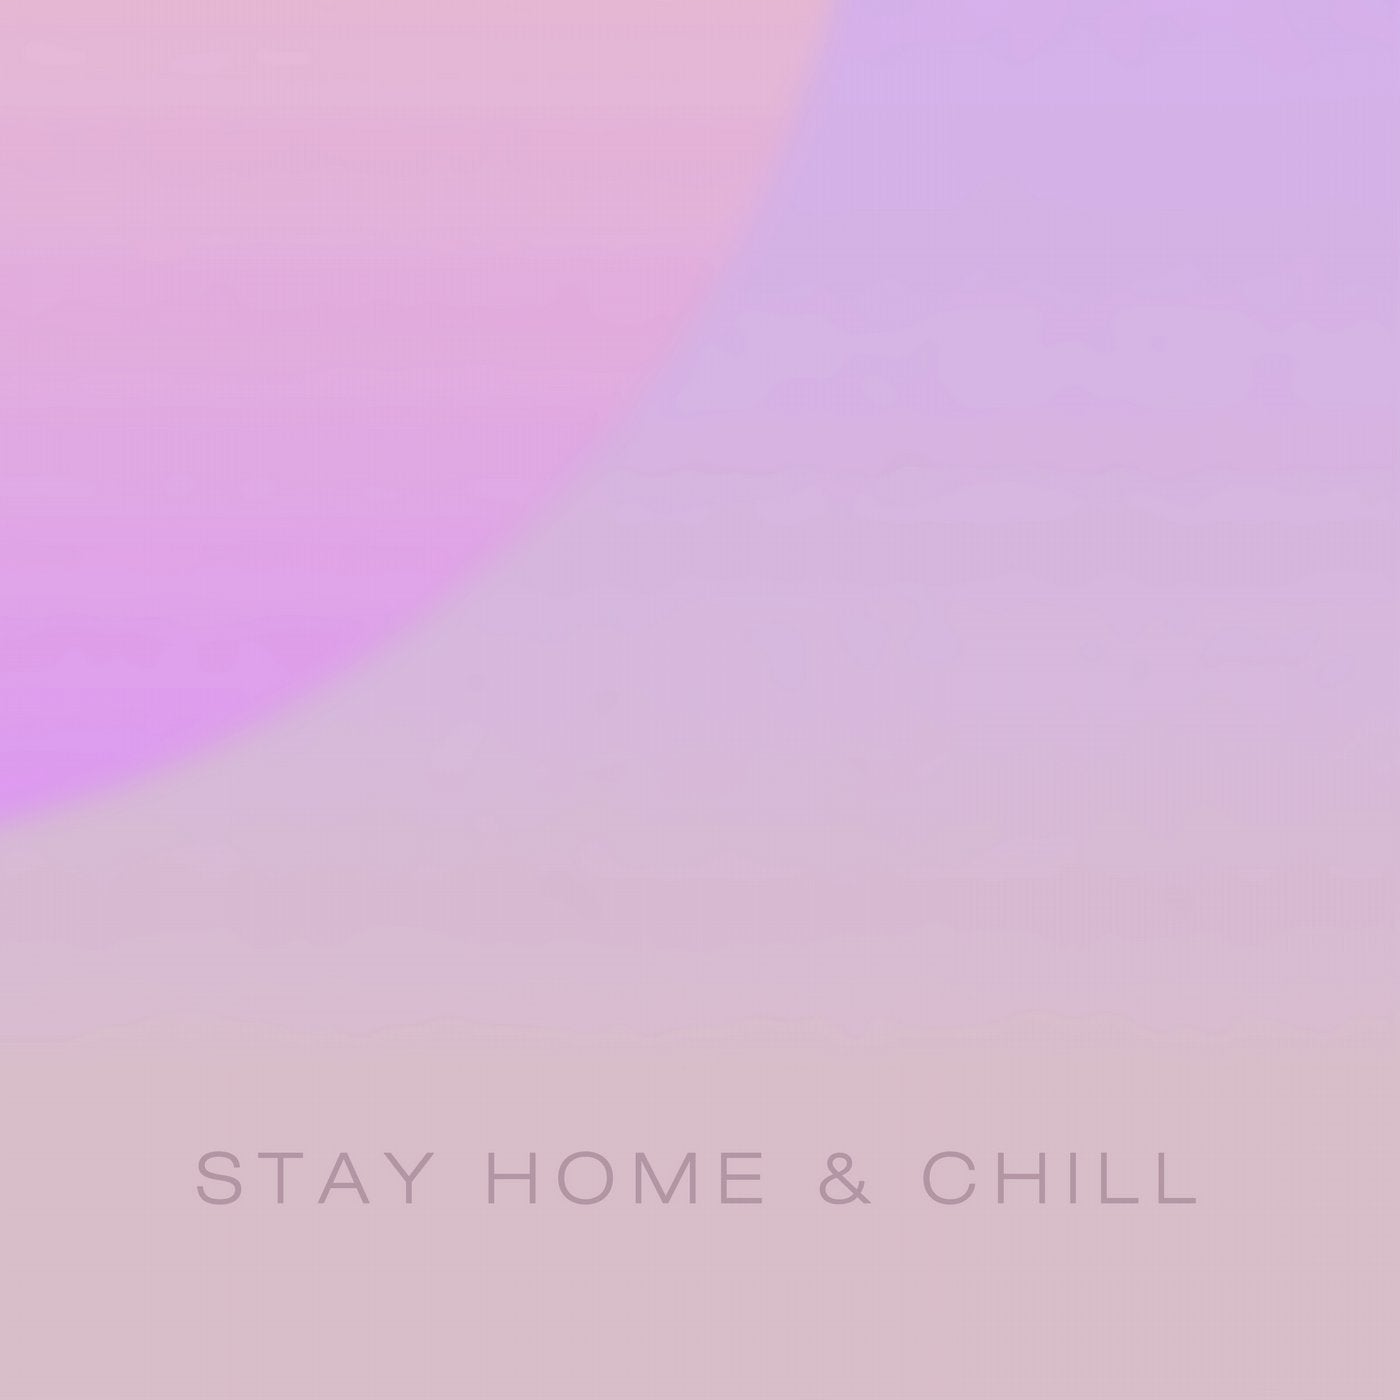 Stay Home & Chill